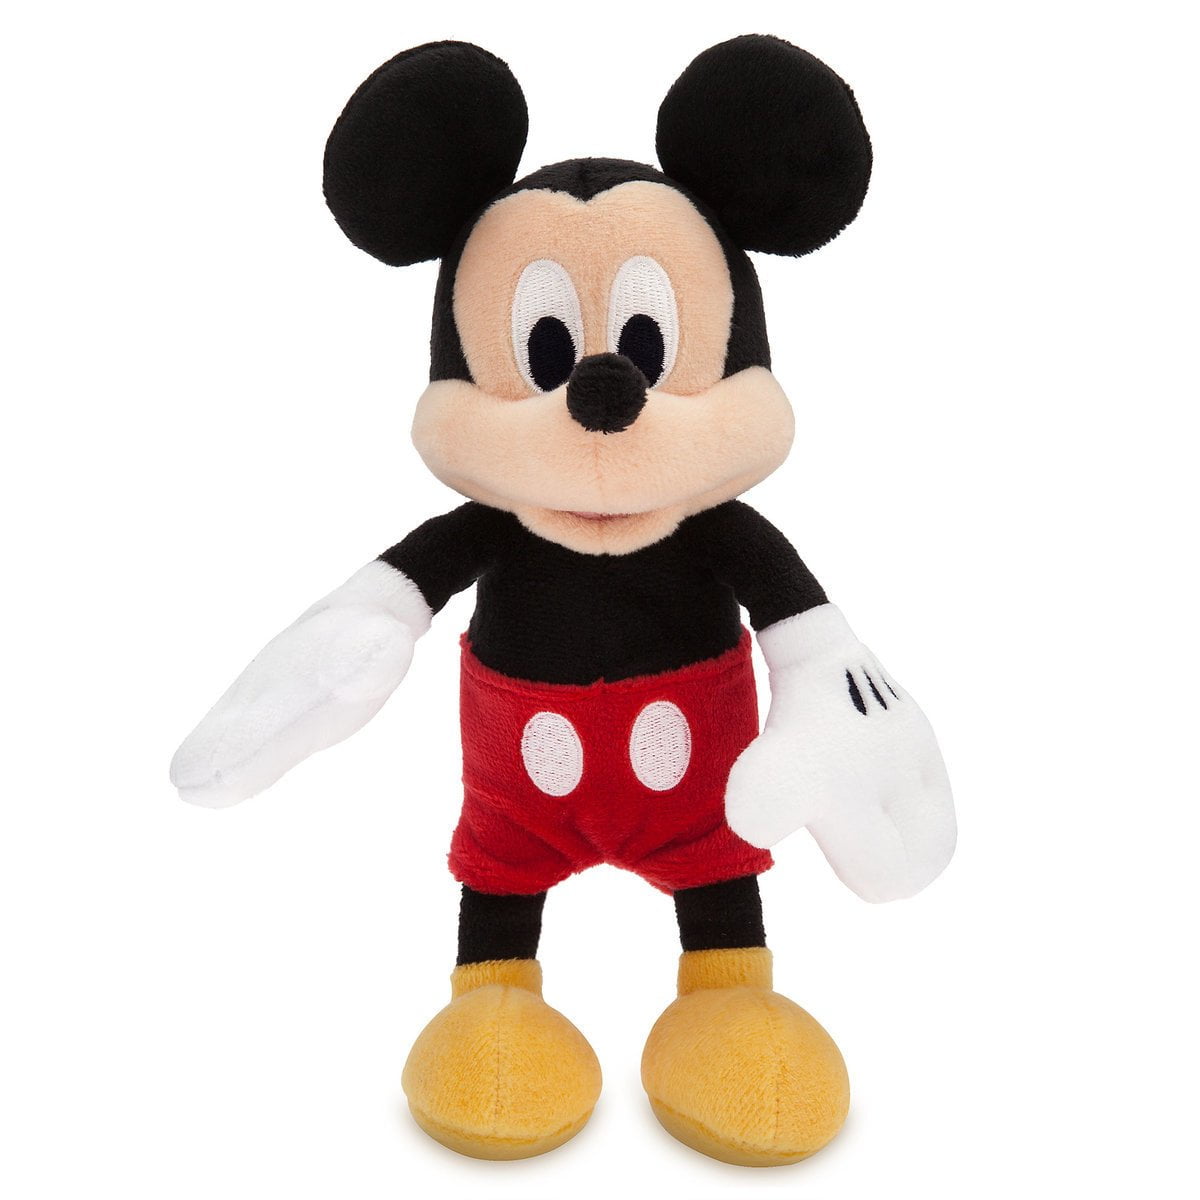 FREE Shipping Details about   NEW Disney Store SUGAR PLUM MINNIE BEANBAG Plush Toy Mouse MWMT 